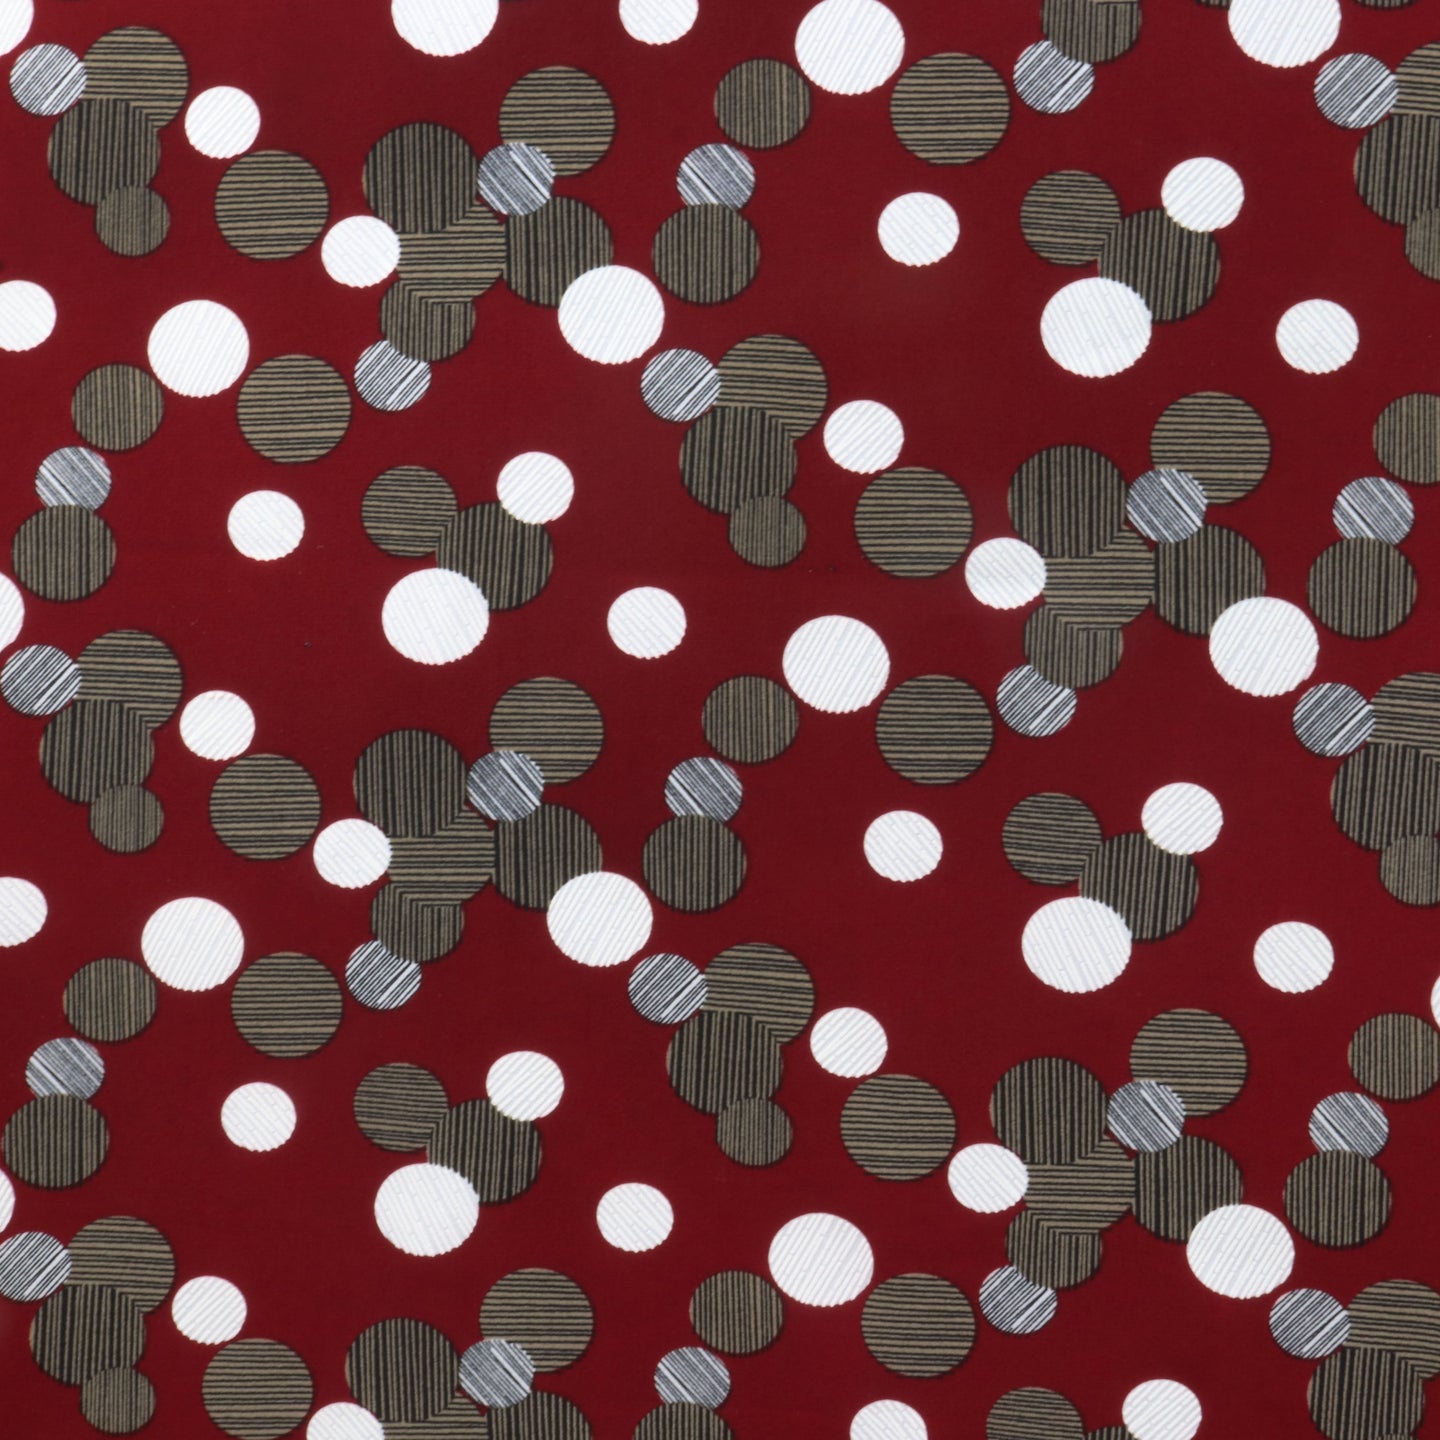 DOTS BUBBLE CIRCLE Polyester/Spandex ITY Knit Jersey Fabric with Puff by the Yard, 58-60